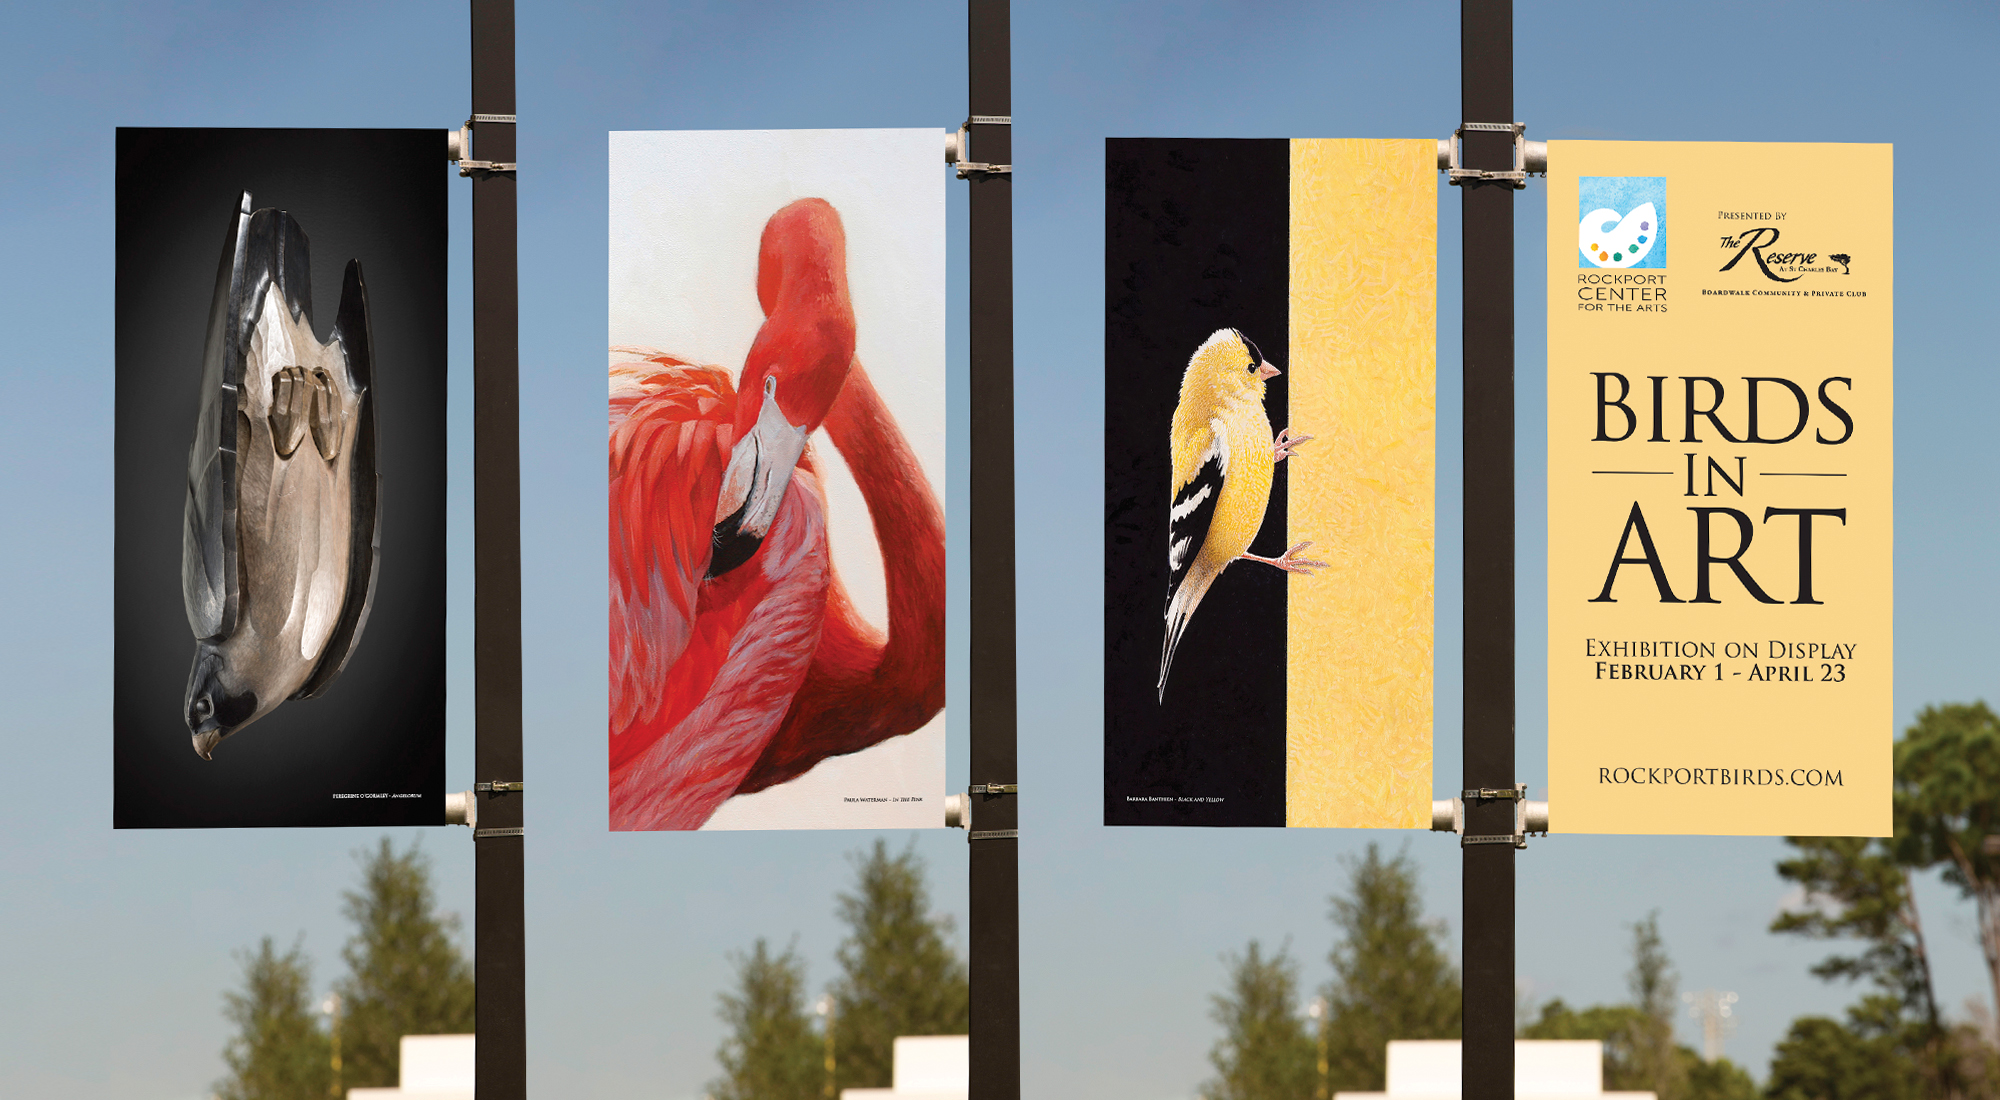 The Reserve’s Home Owners Celebrate BIRDS IN ART